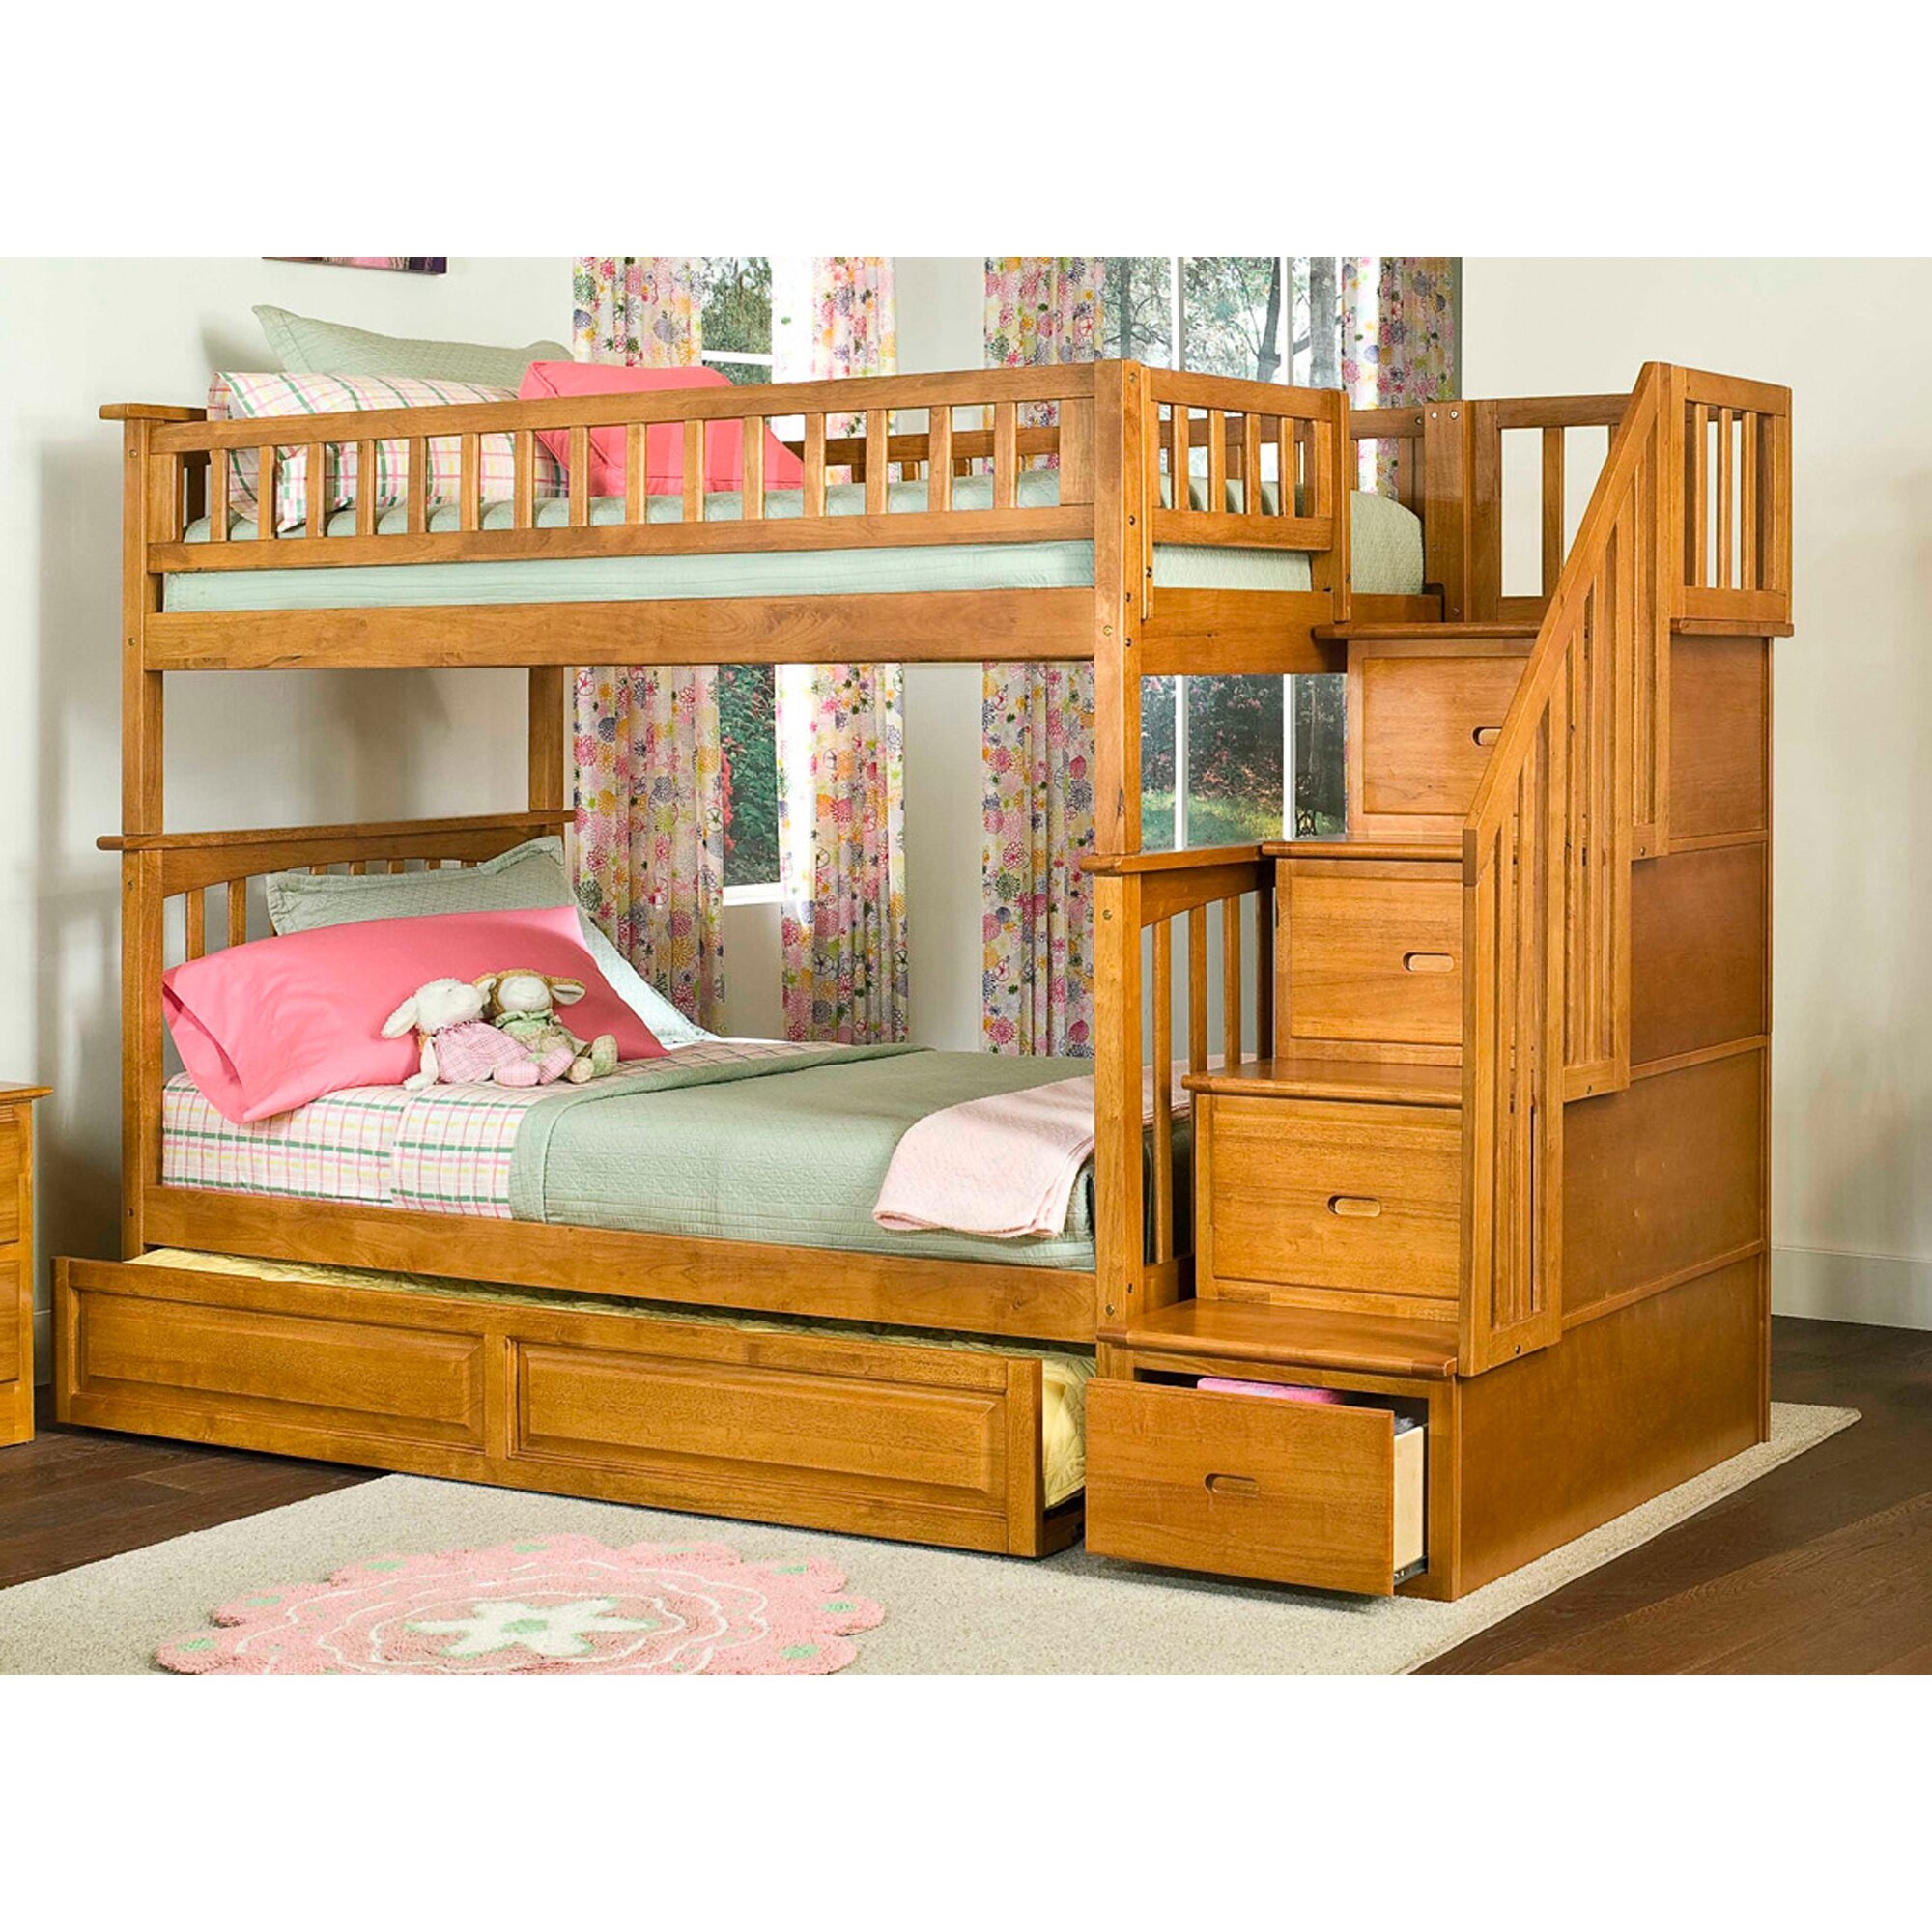 Full Size Loft Bed With Stairs Visualhunt, Ponderosa Bunk Bed The Brick